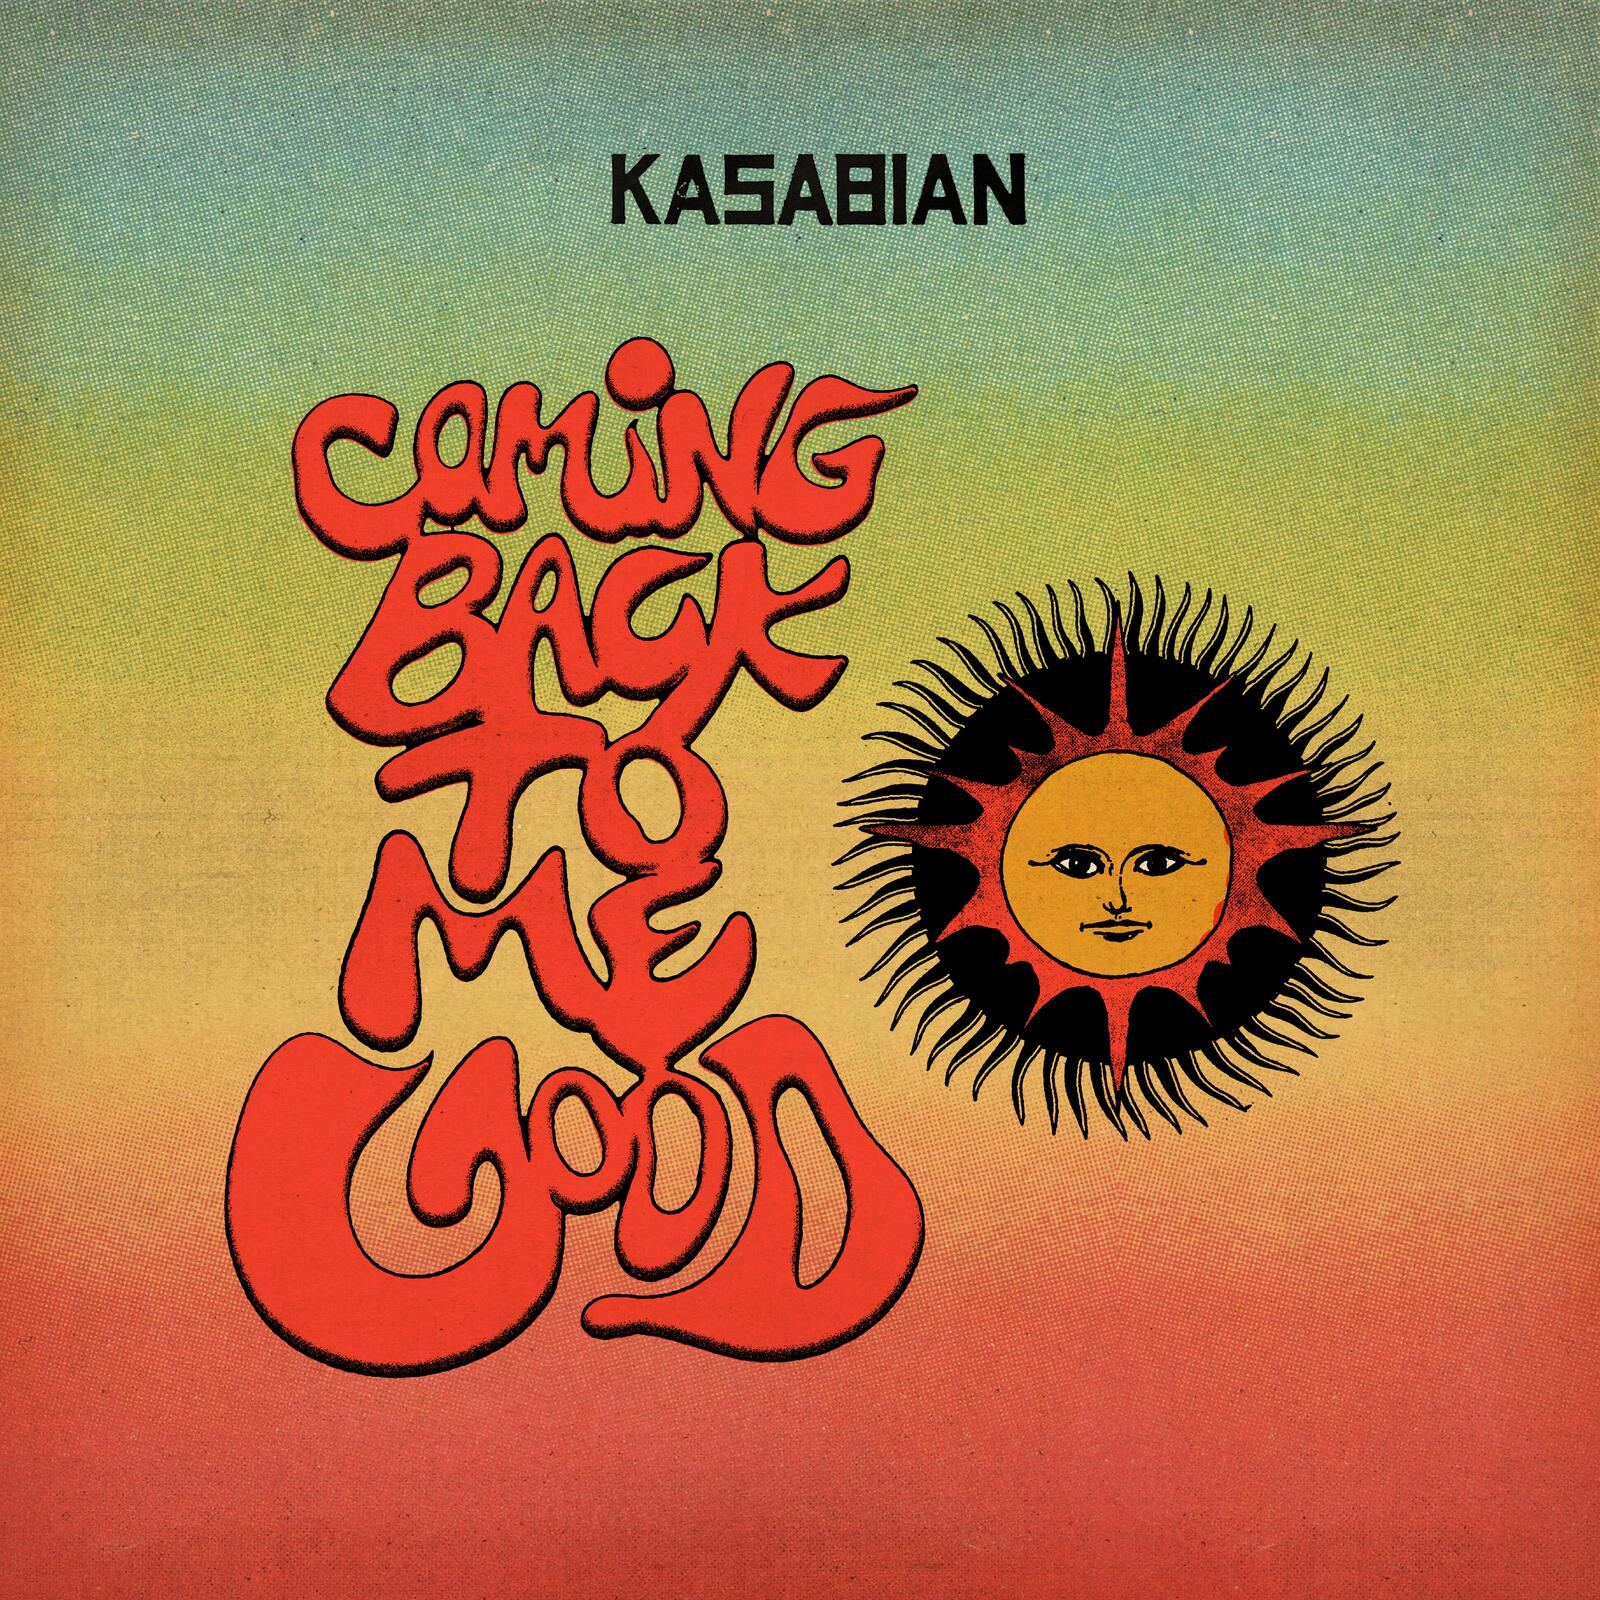 You are currently viewing SuperNova: Kasabian – Coming Back To Me Good (26.04)